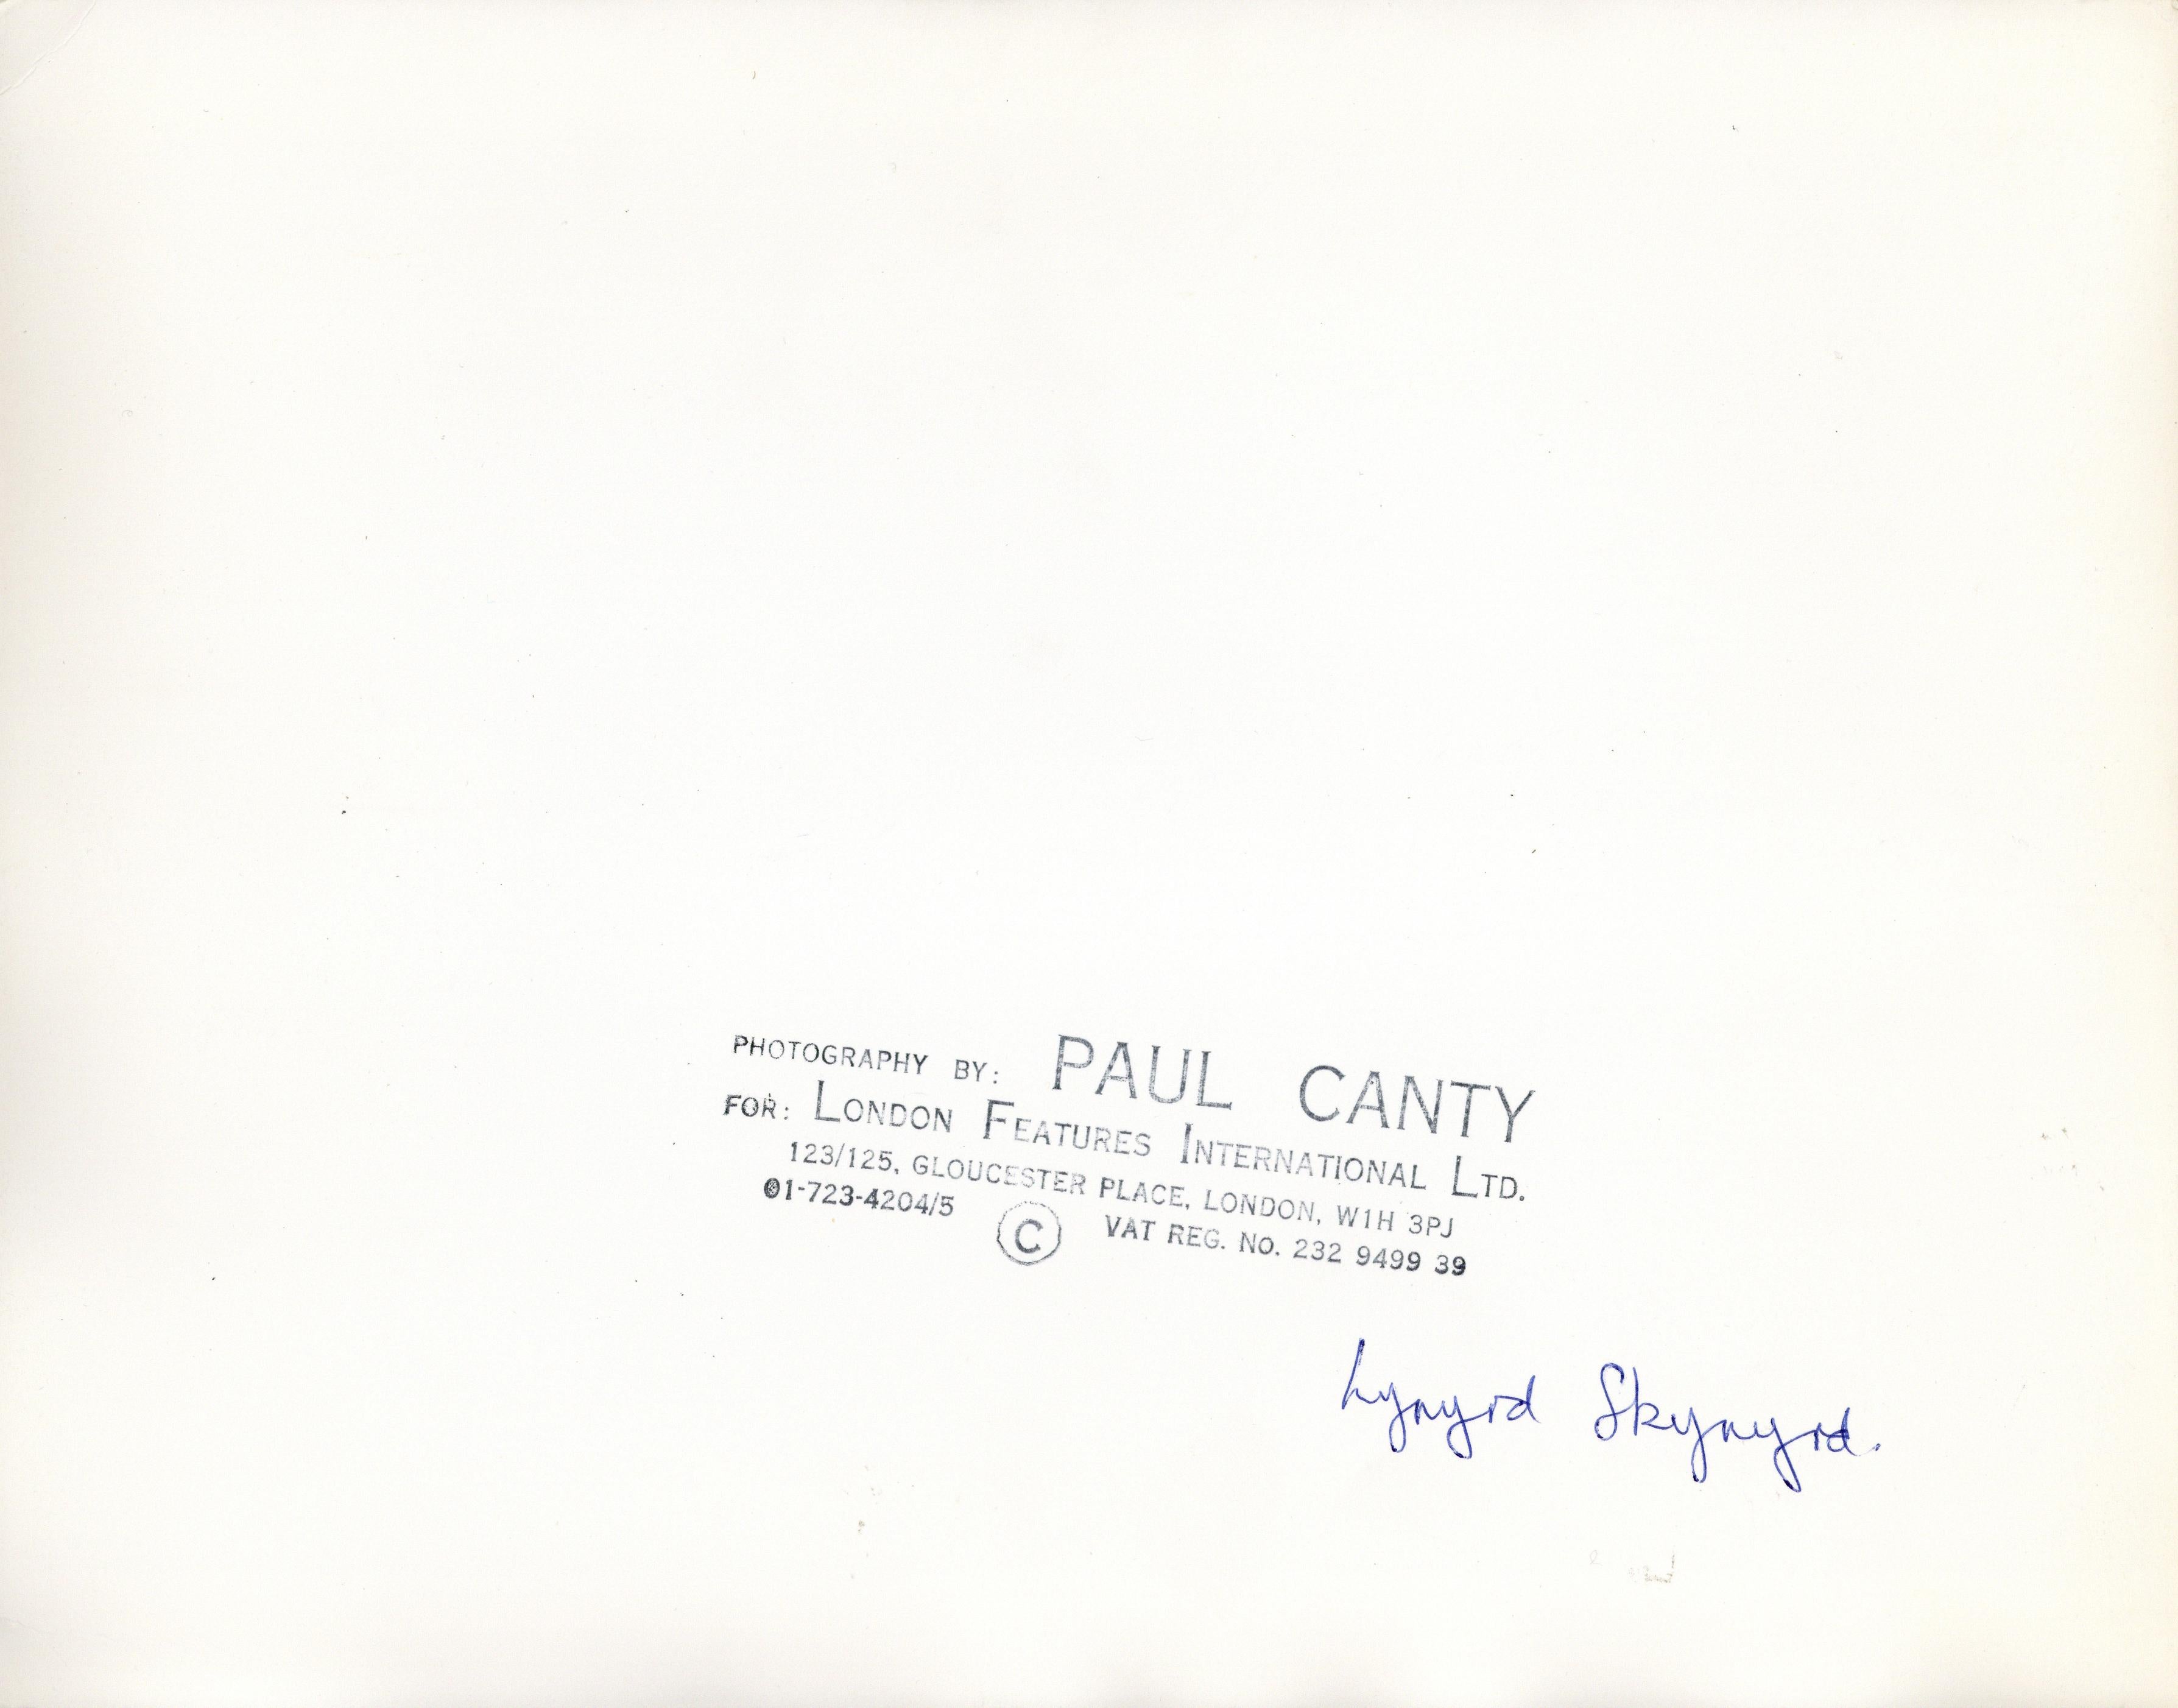 paul canty